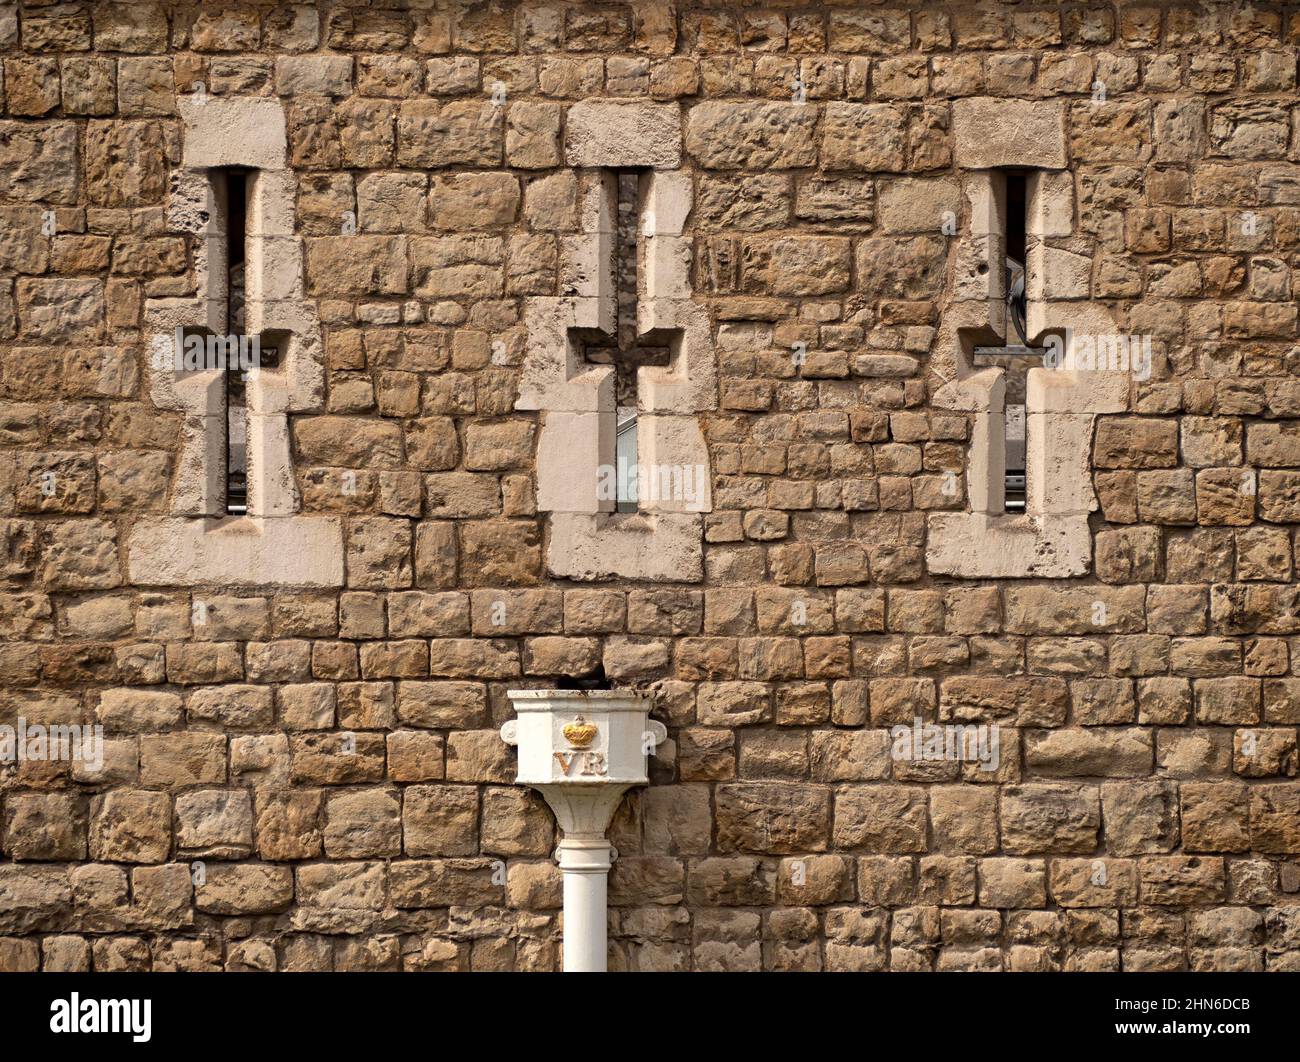 LONDON, UK - AUGUST 17, 2018:  Arrowslits in the walls of The Tower of London with Victorian drainpipe Stock Photo